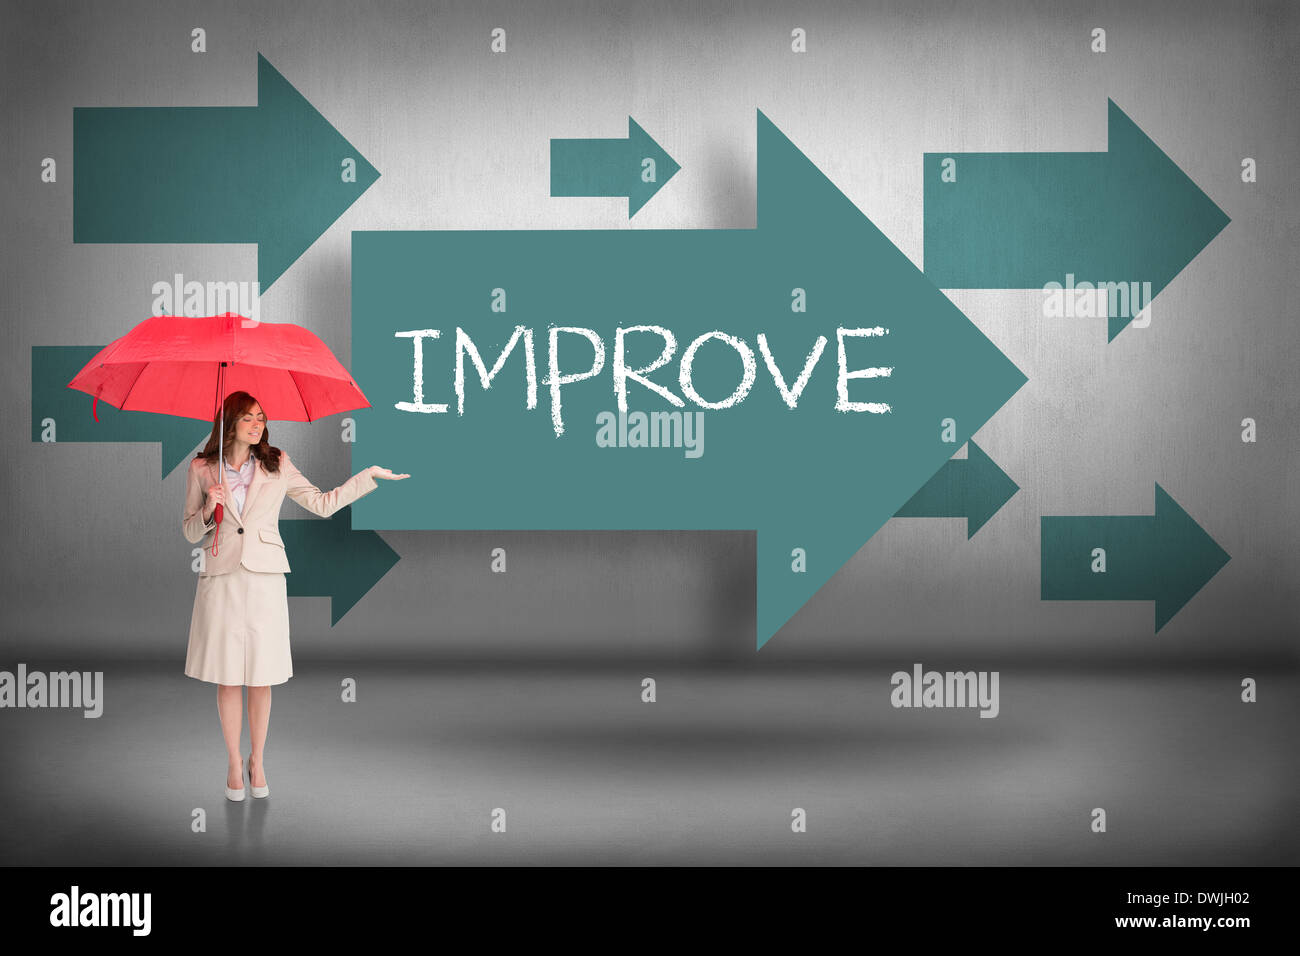 Improve against blue arrows pointing Stock Photo